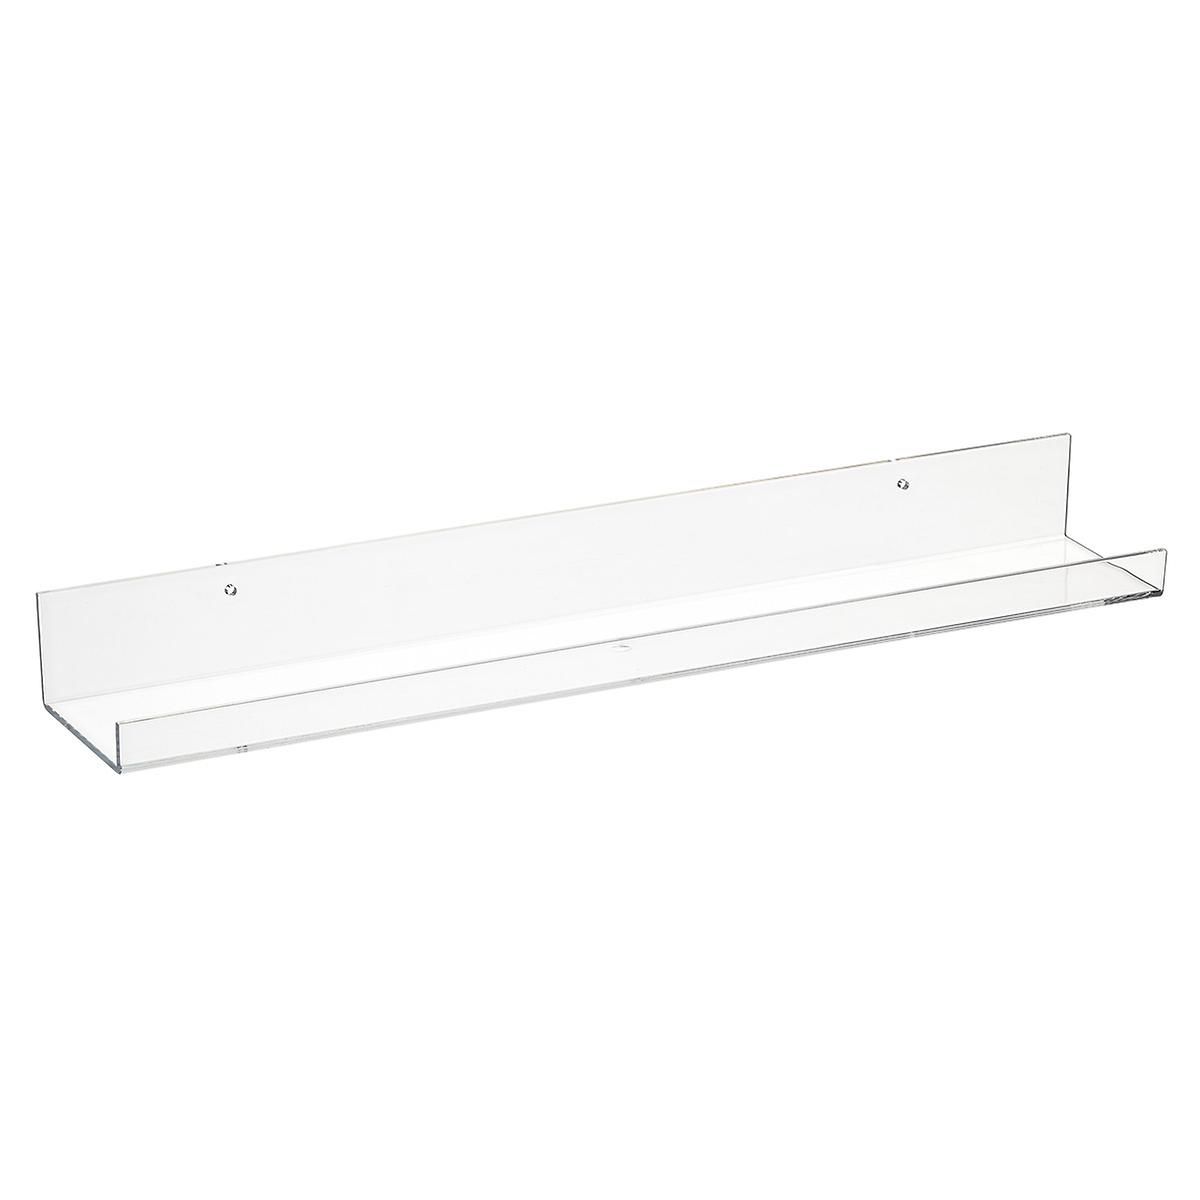 Acrylic U-Shelf | The Container Store